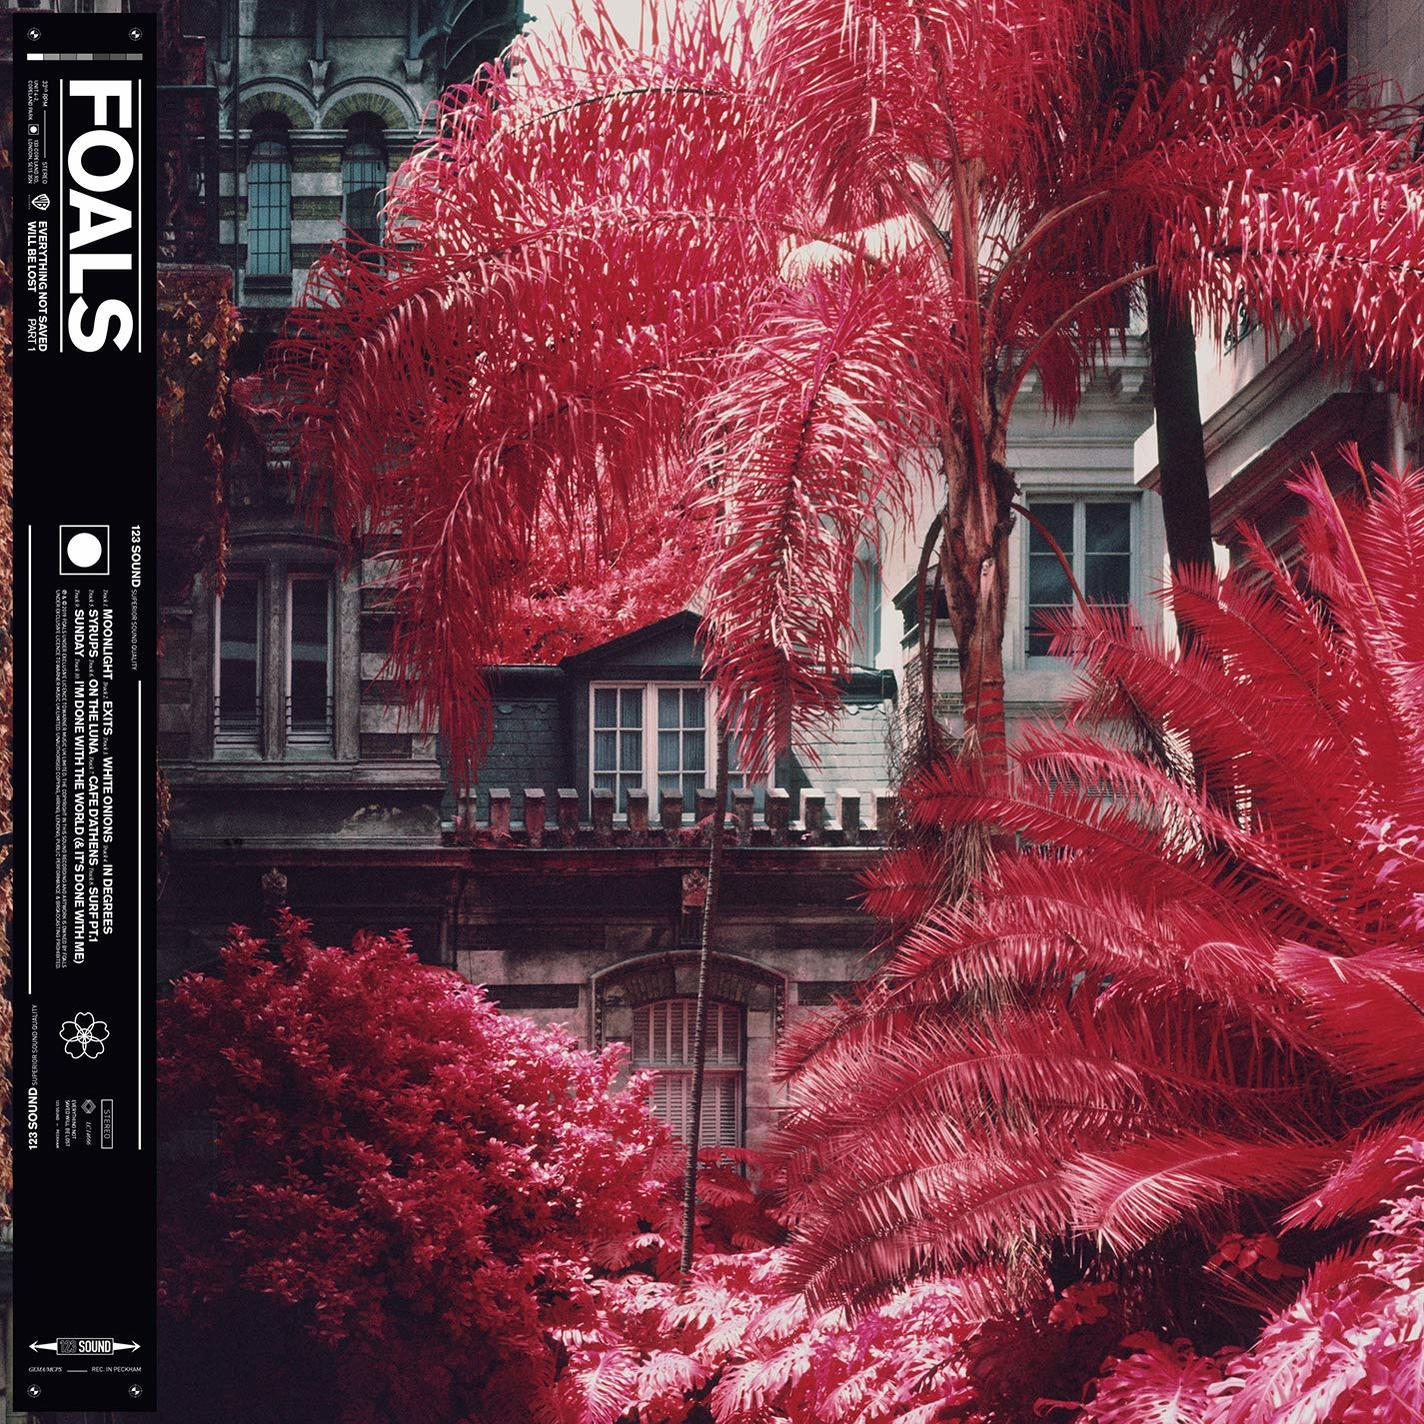 Lost Not Will Be Foals - Saved (Vinyl) Everything Pt.1 -